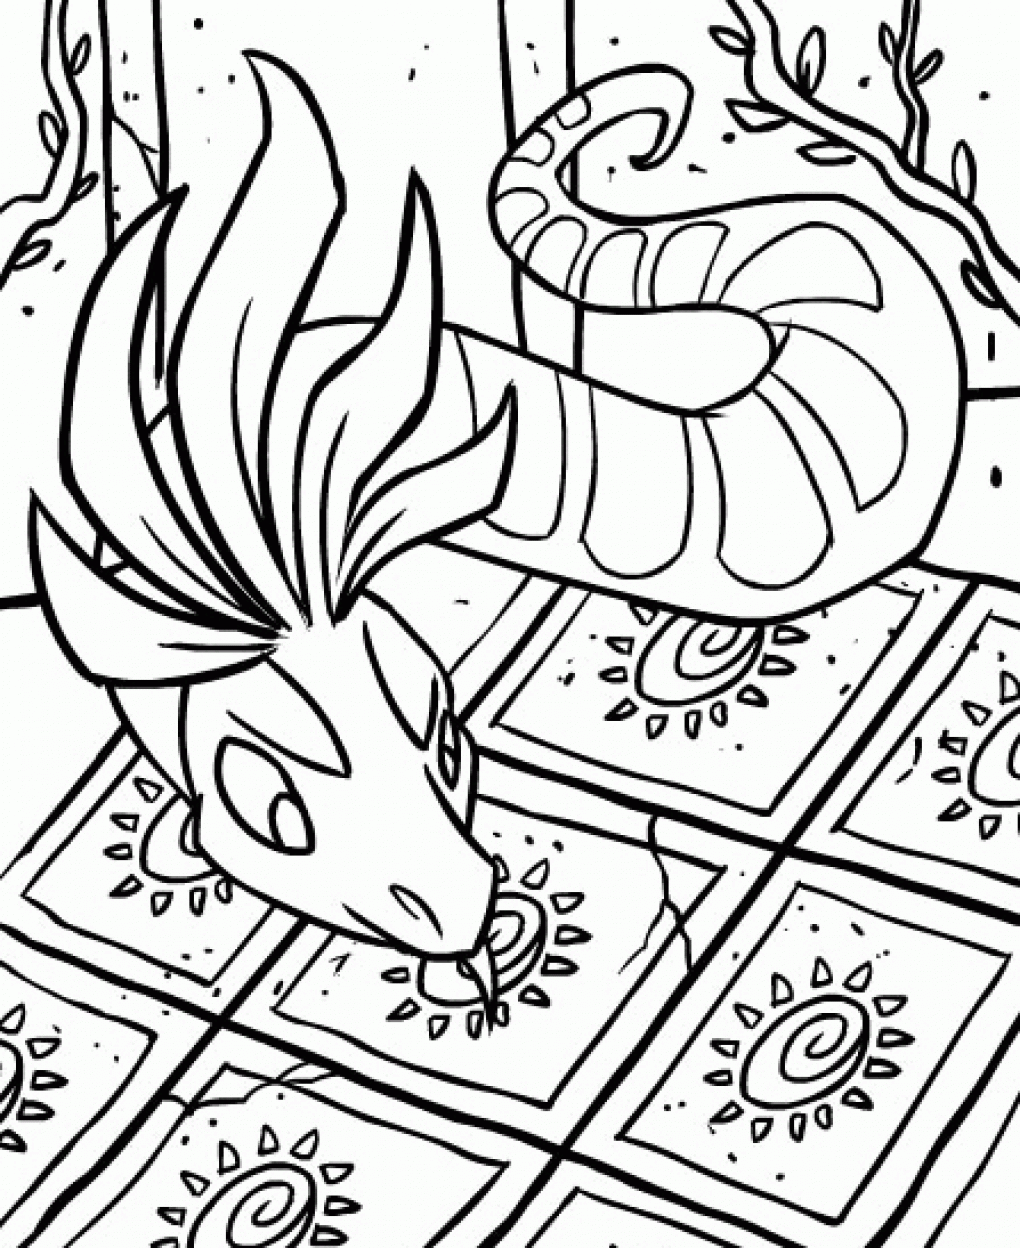 Neopets Coloring Pages Coloring Pages on ColoringBase